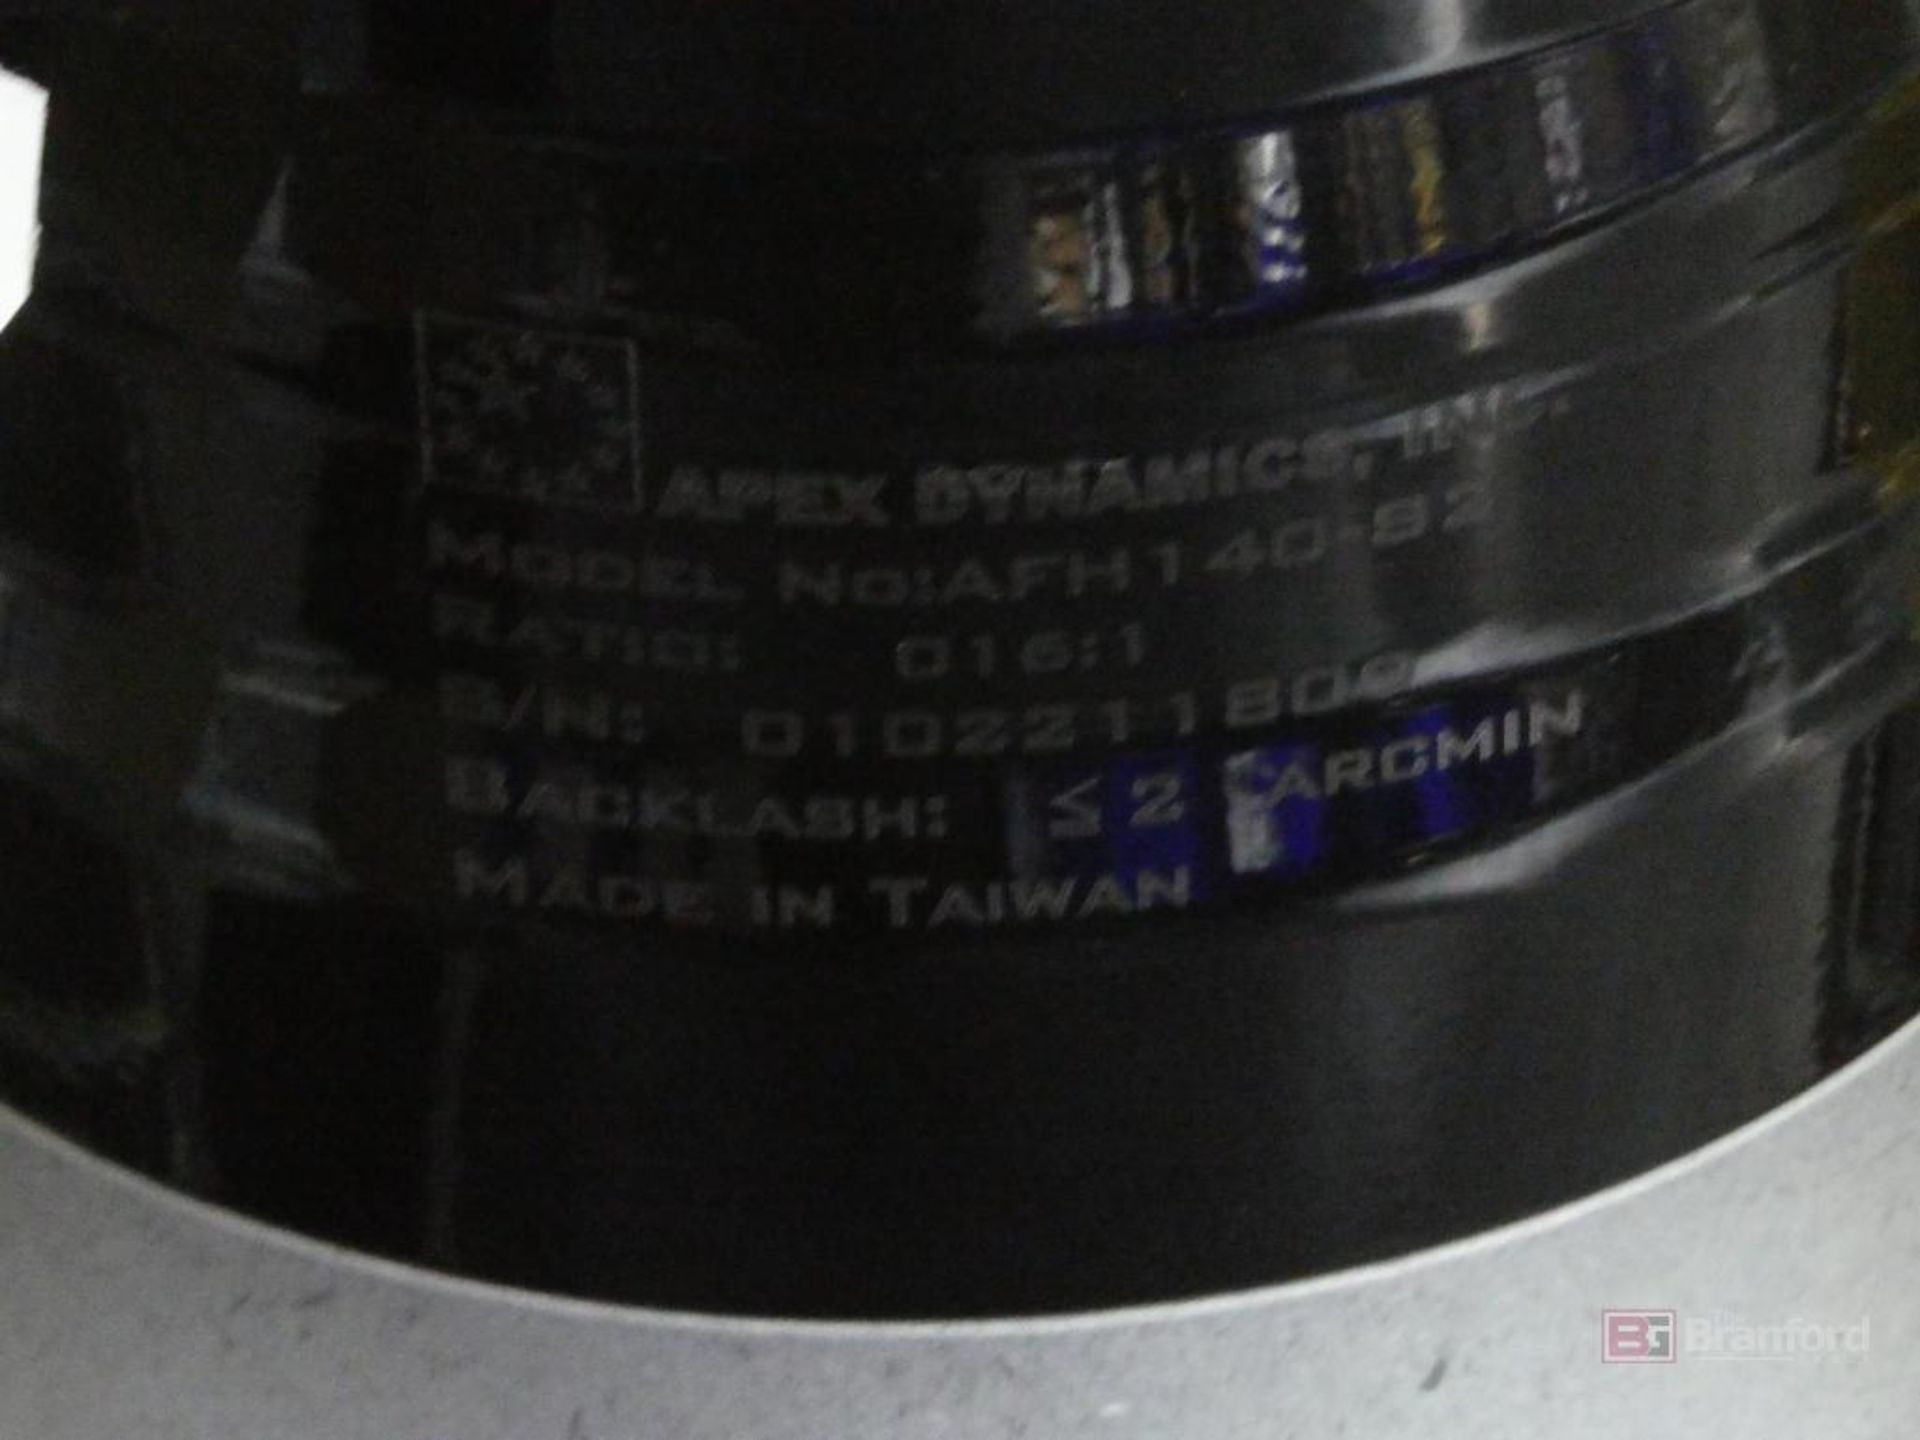 (3) Apex Dynamics Model AFH140-S2, High Precision Planetary Gearboxes (New) - Image 3 of 3